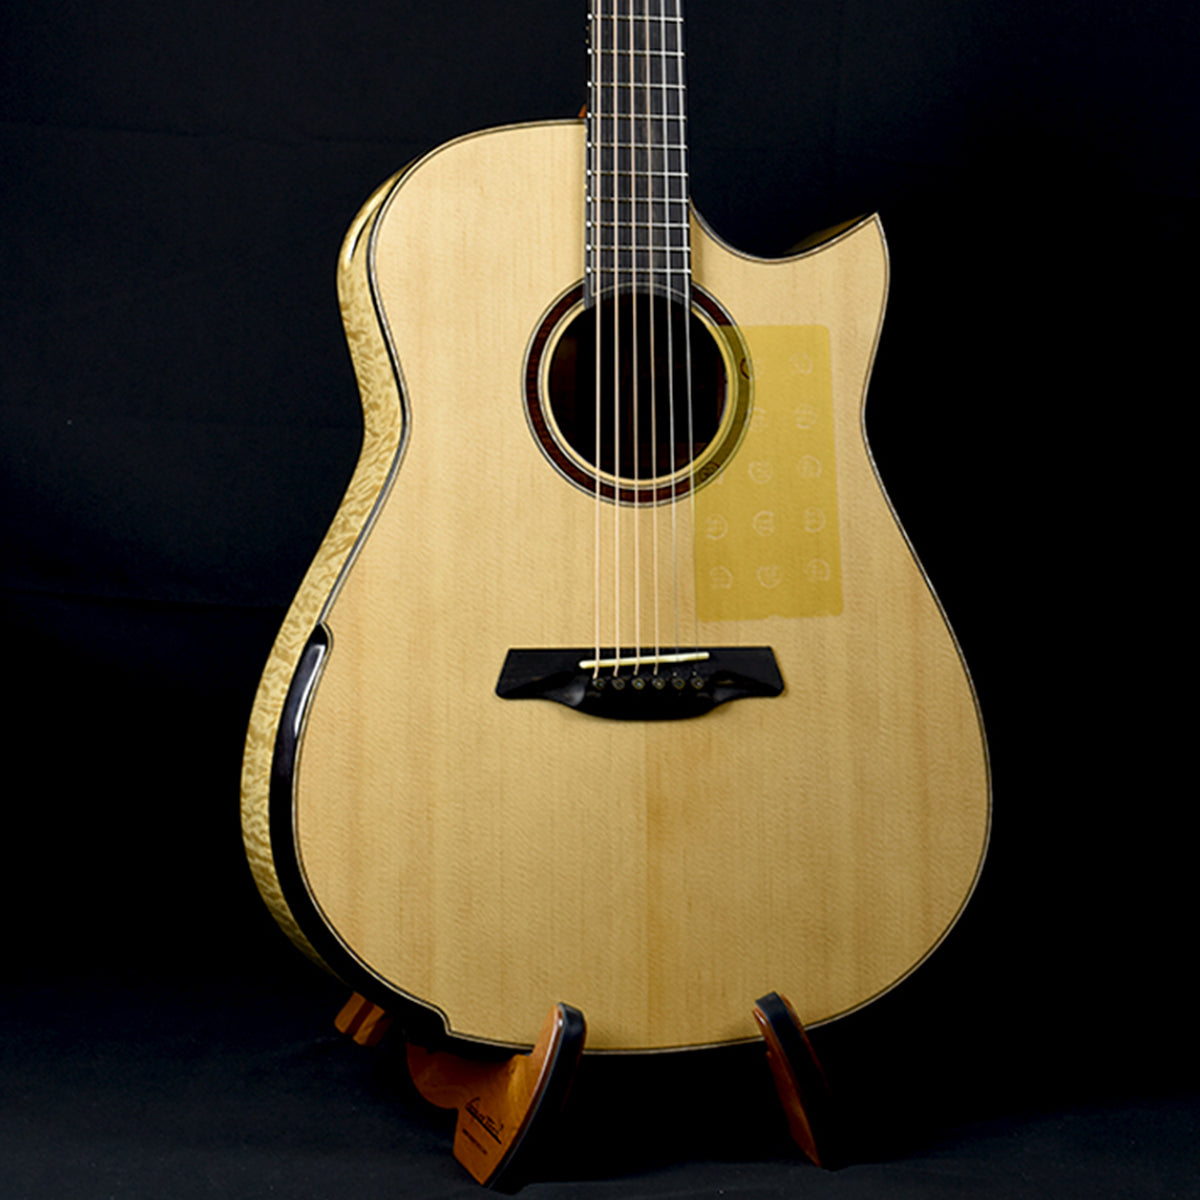 MD Sitka with Flamed Maple